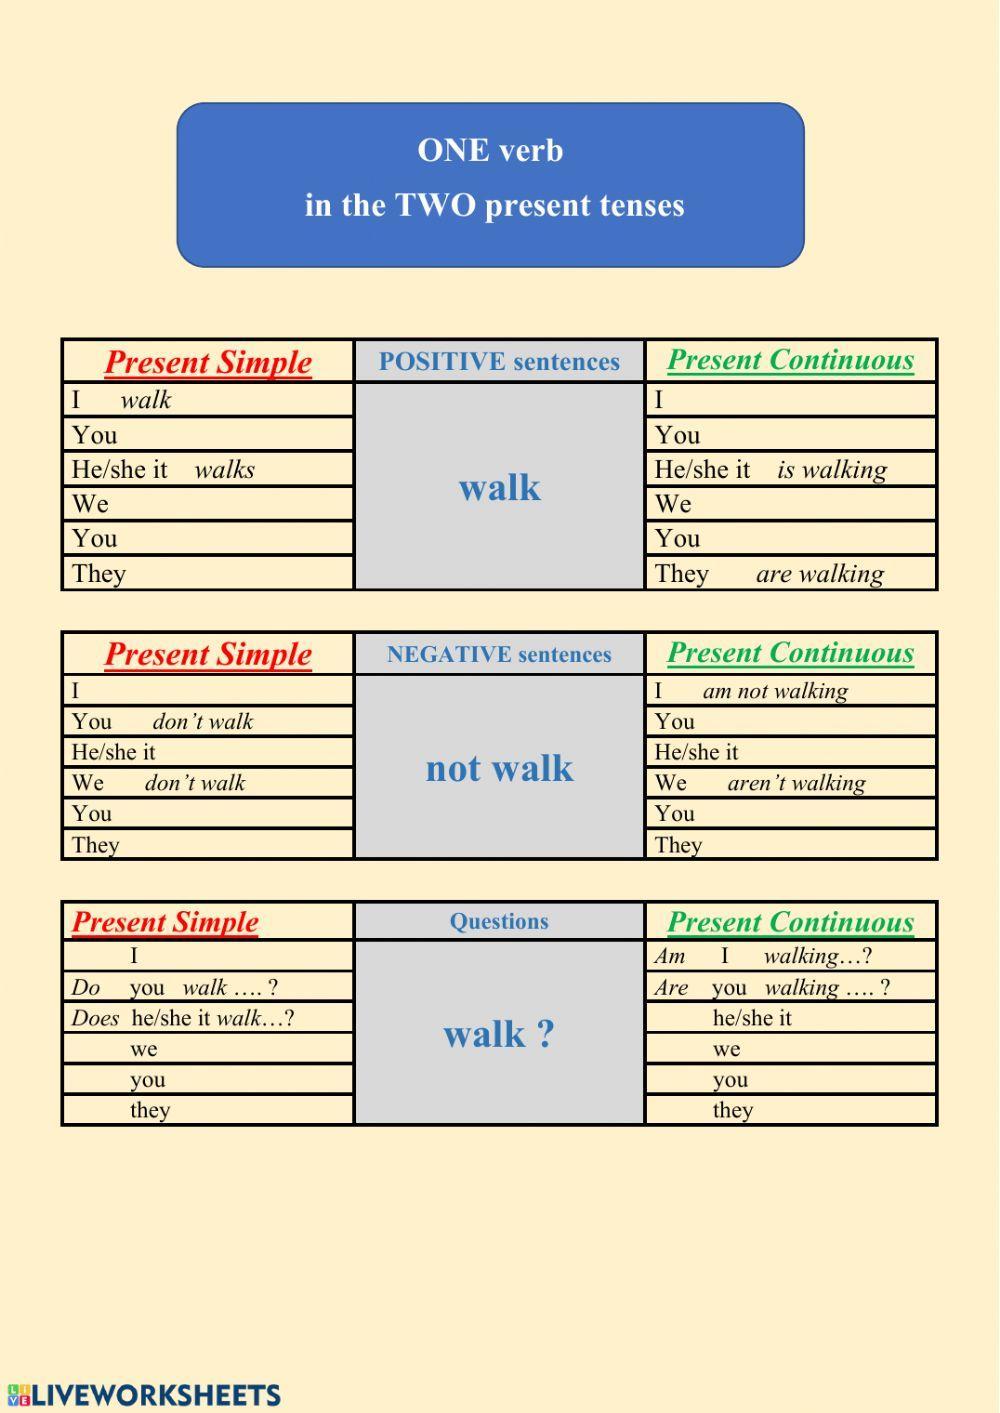 One verb in the two present tenses